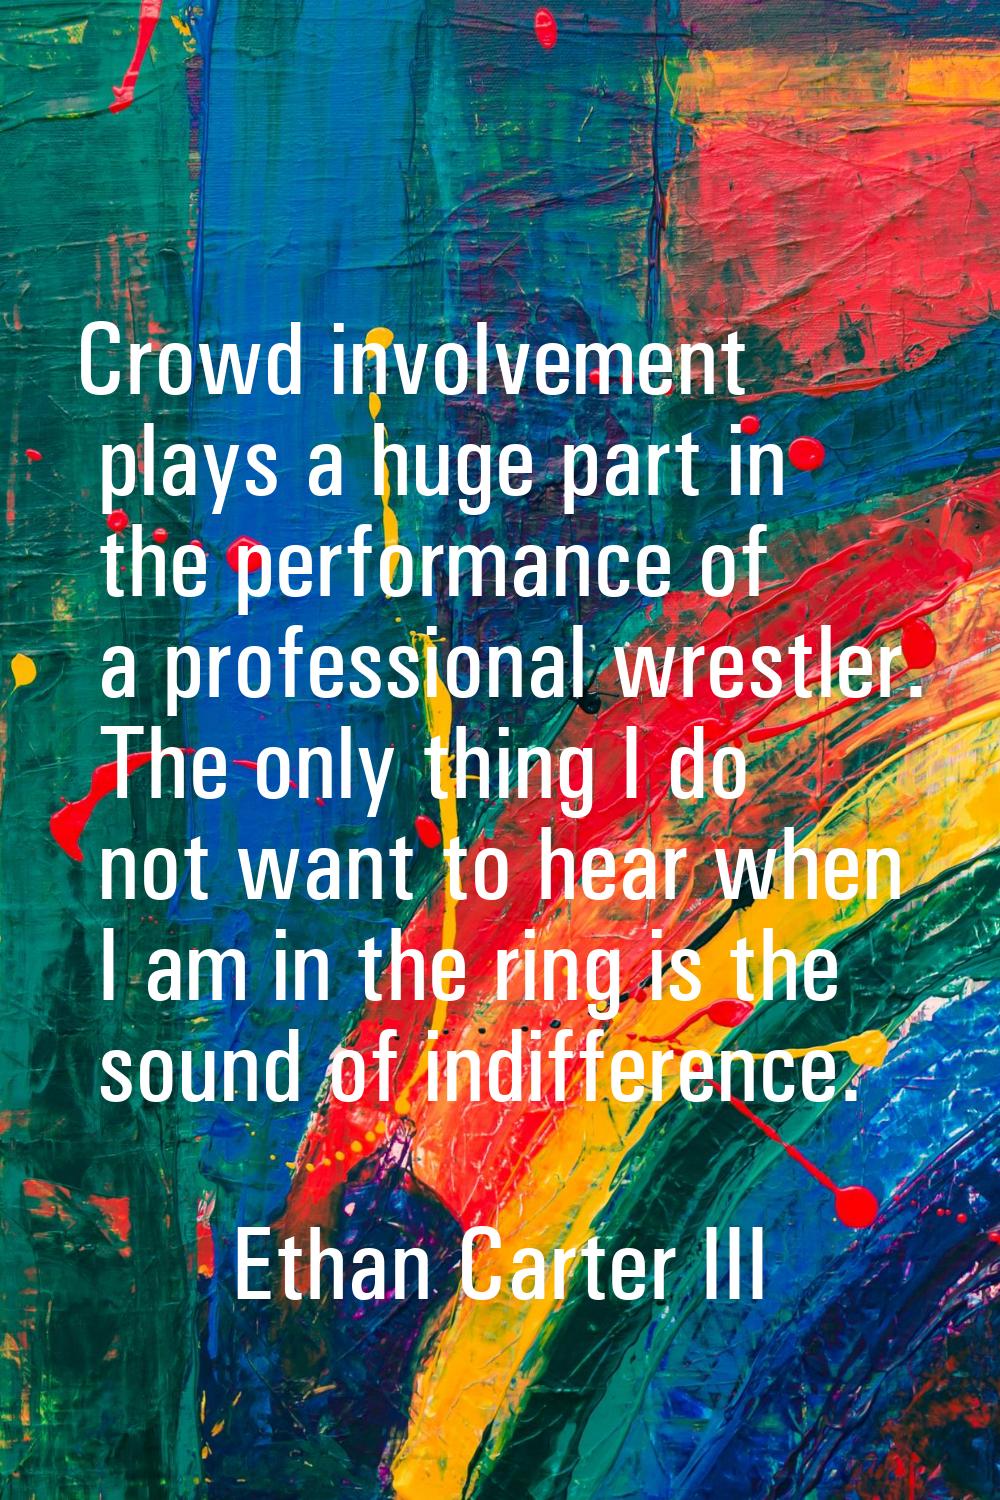 Crowd involvement plays a huge part in the performance of a professional wrestler. The only thing I